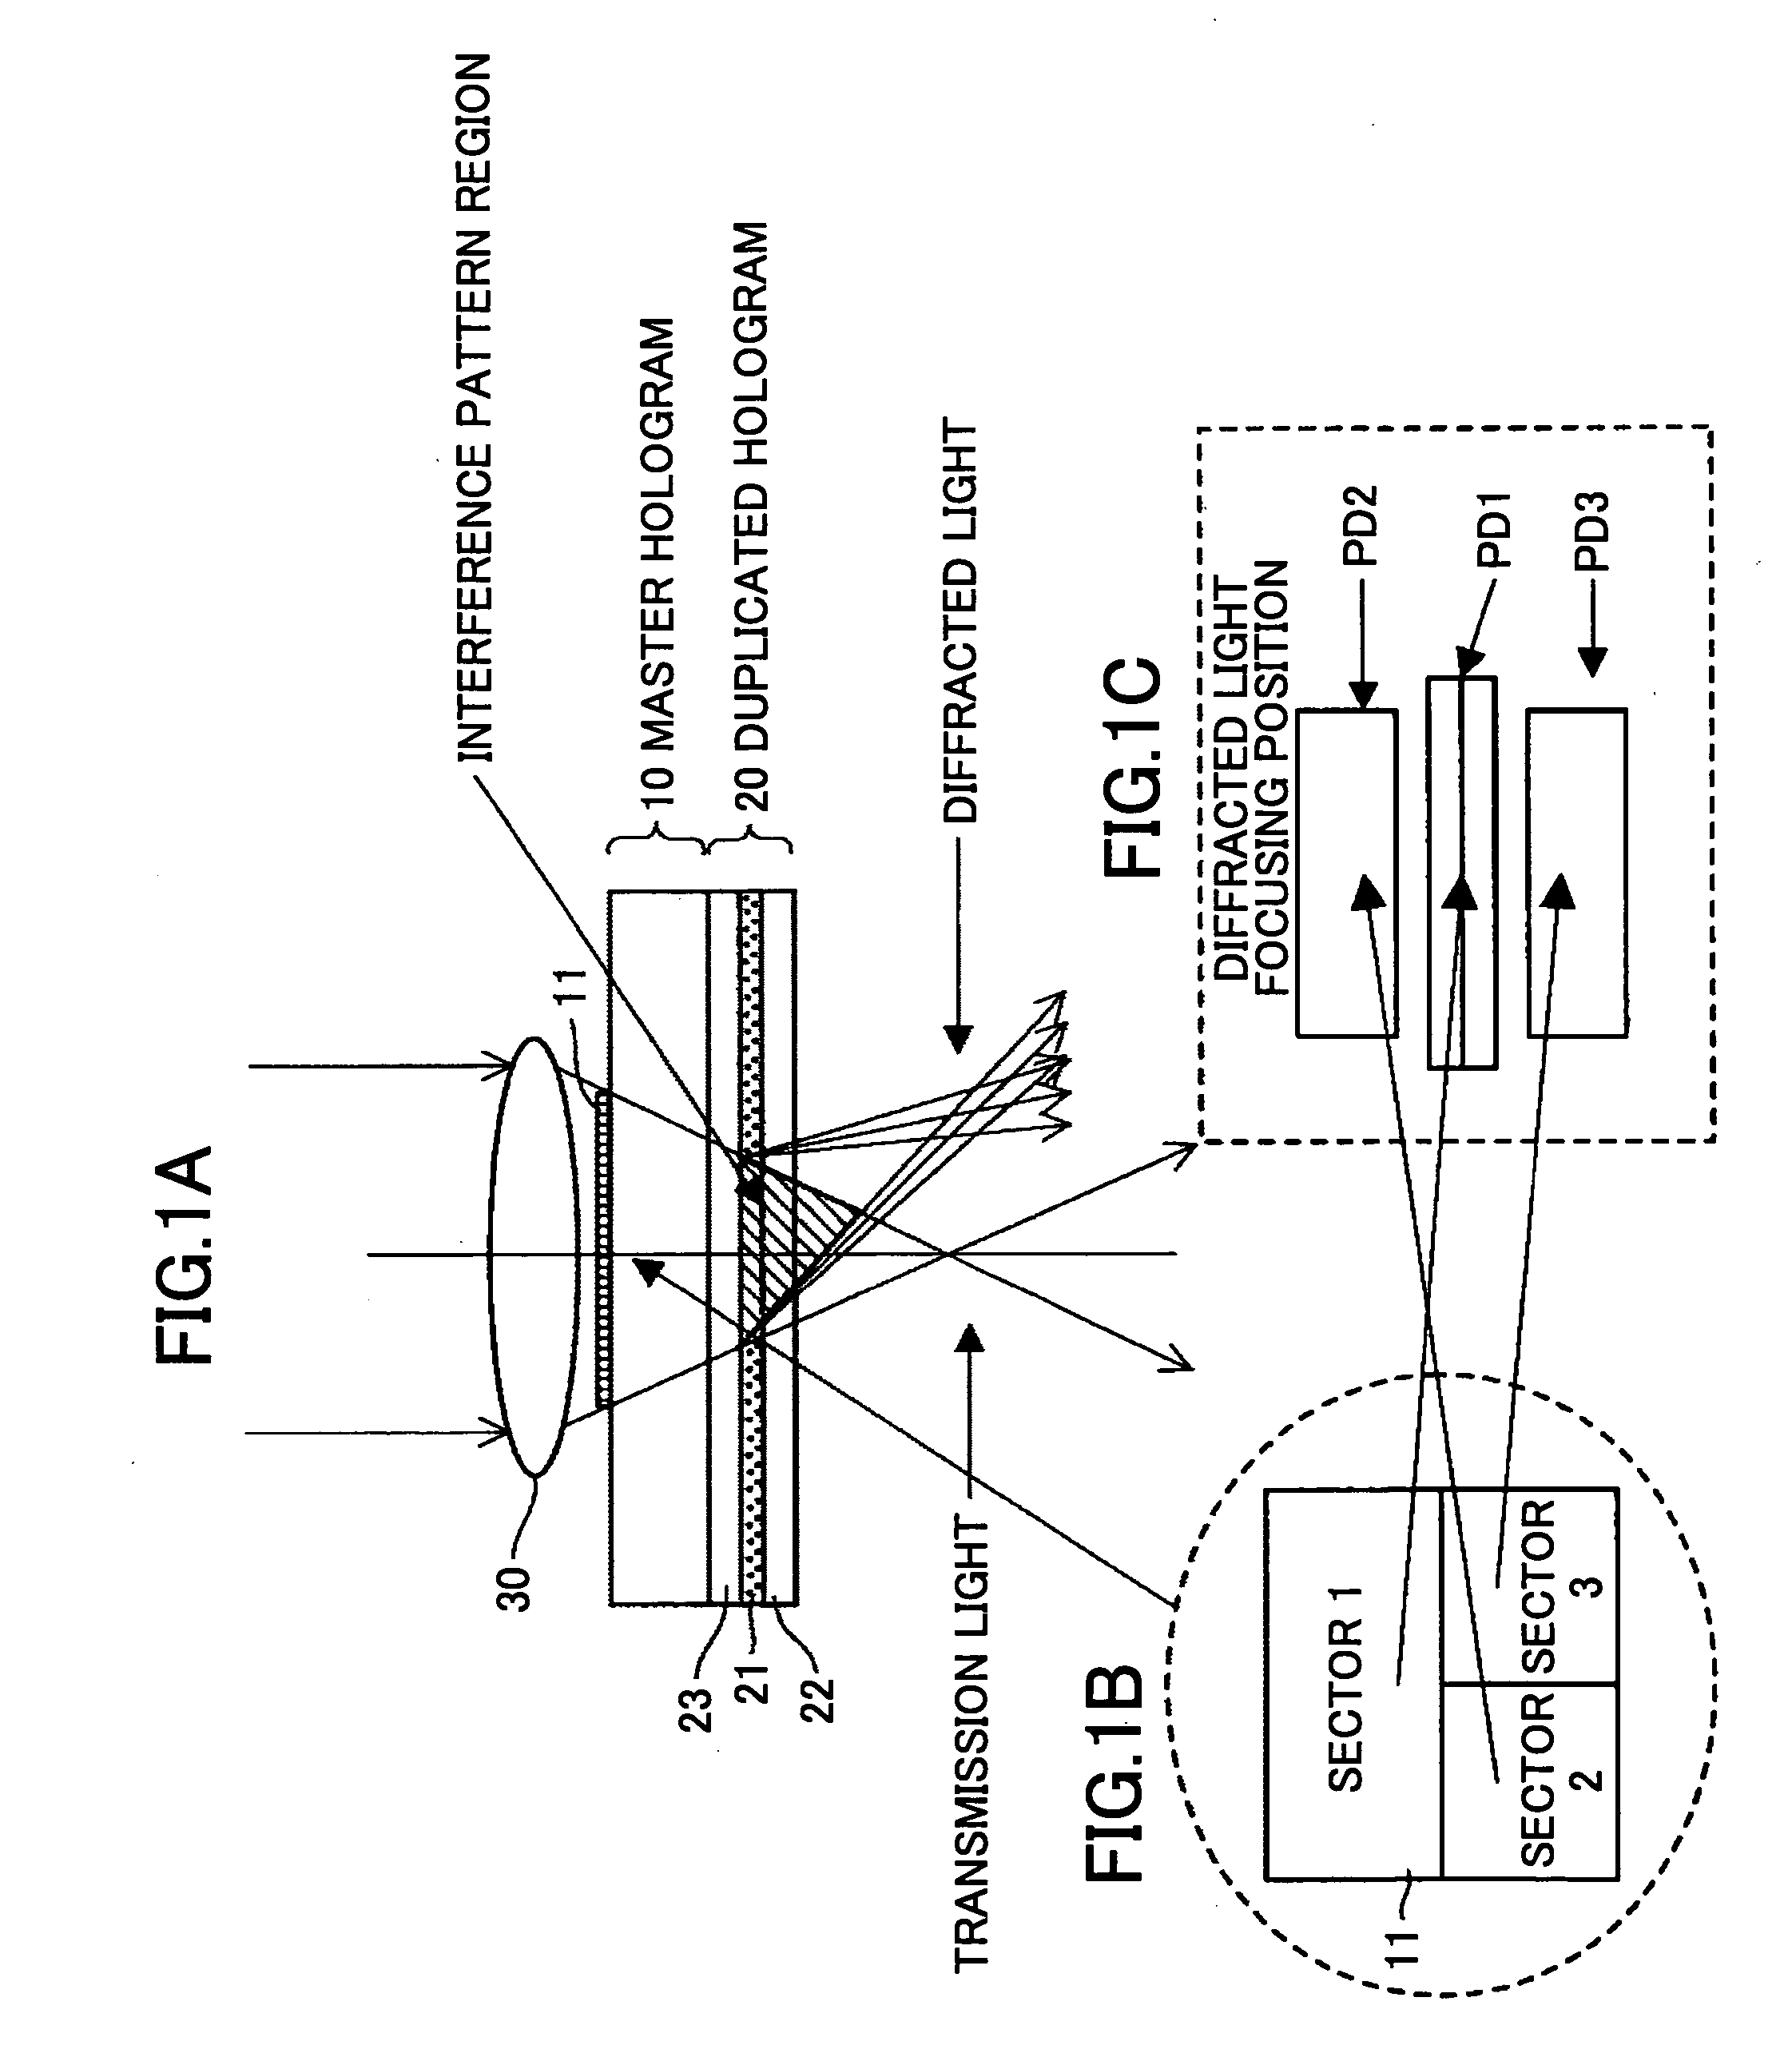 Hologram element, production method thereof, and optical header